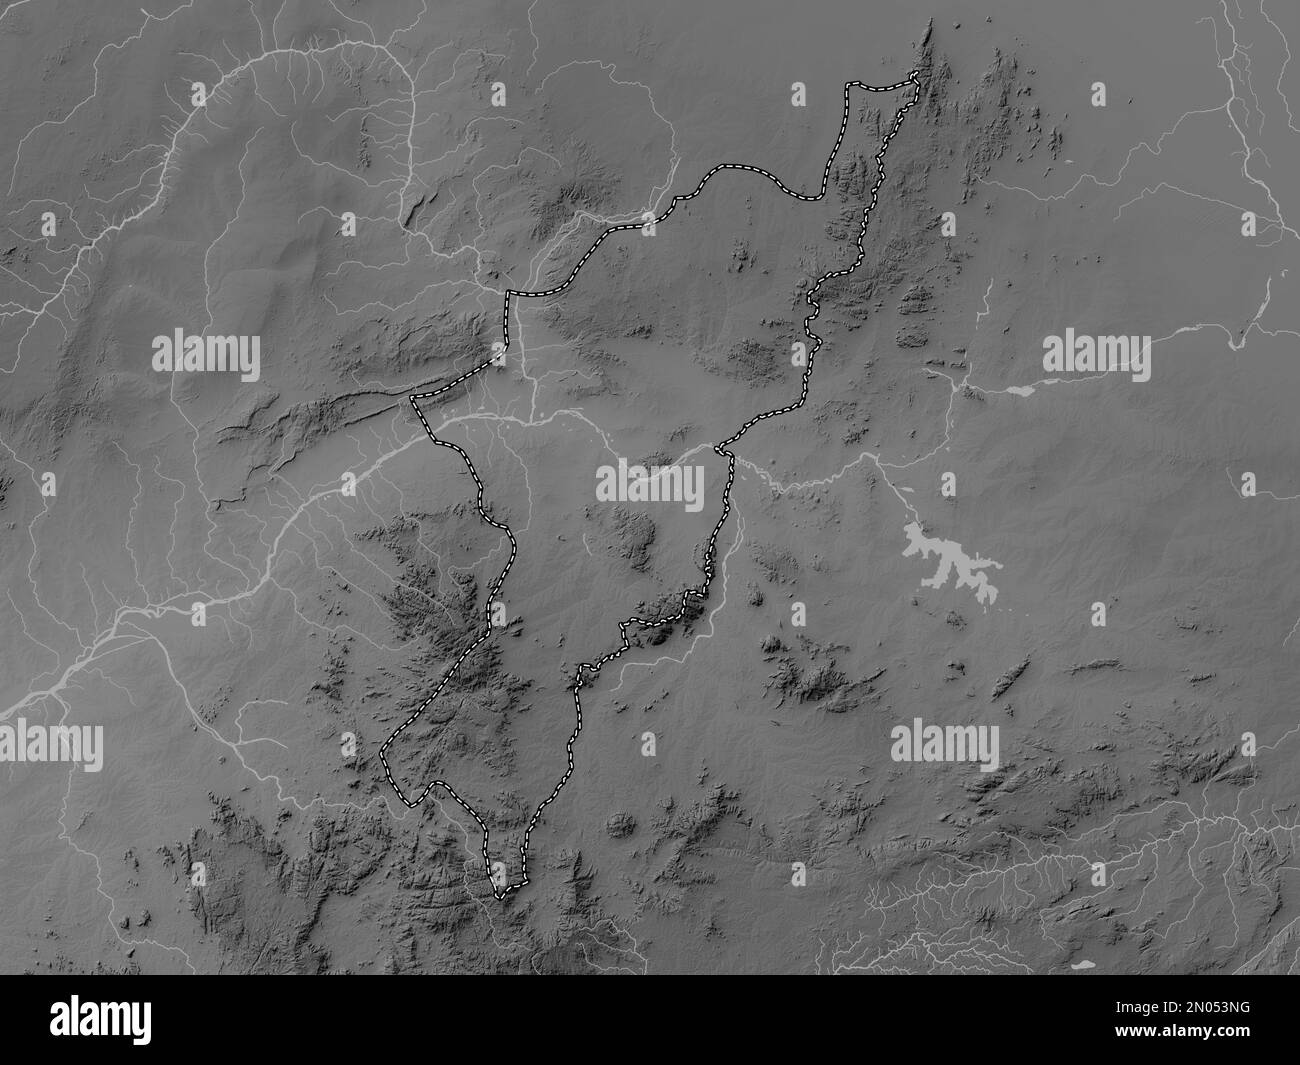 Adamawa, state of Nigeria. Grayscale elevation map with lakes and rivers Stock Photo